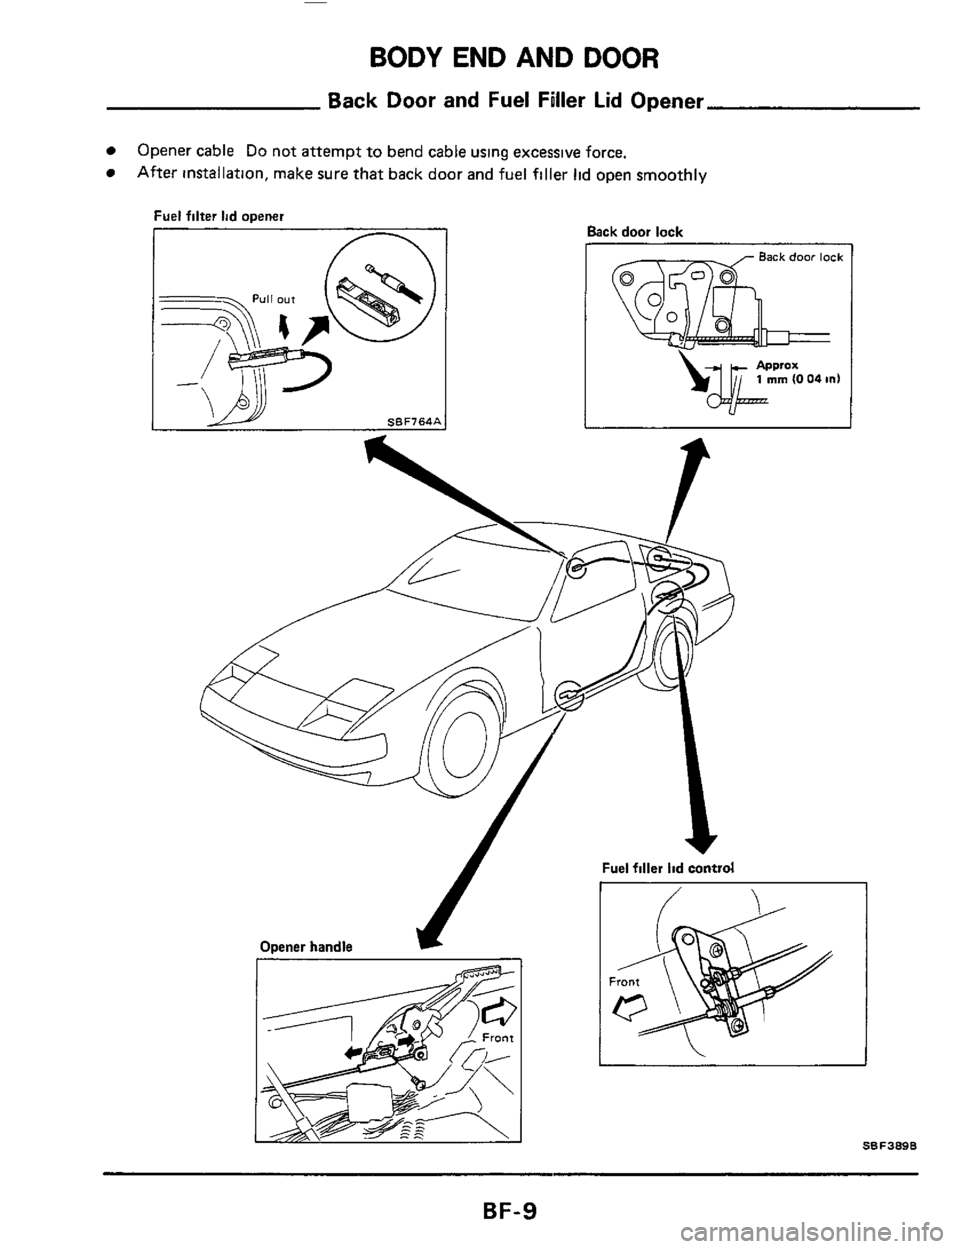 NISSAN 300ZX 1984 Z31 Body Workshop Manual BODYENDANDDOOR 
Back Door and Fuel Filler Lid Opener 
Opener  cable Do not attempt to bend  cable using  excessive force. 
After installation,  make sure that back door and fuel filler lid  open smoot